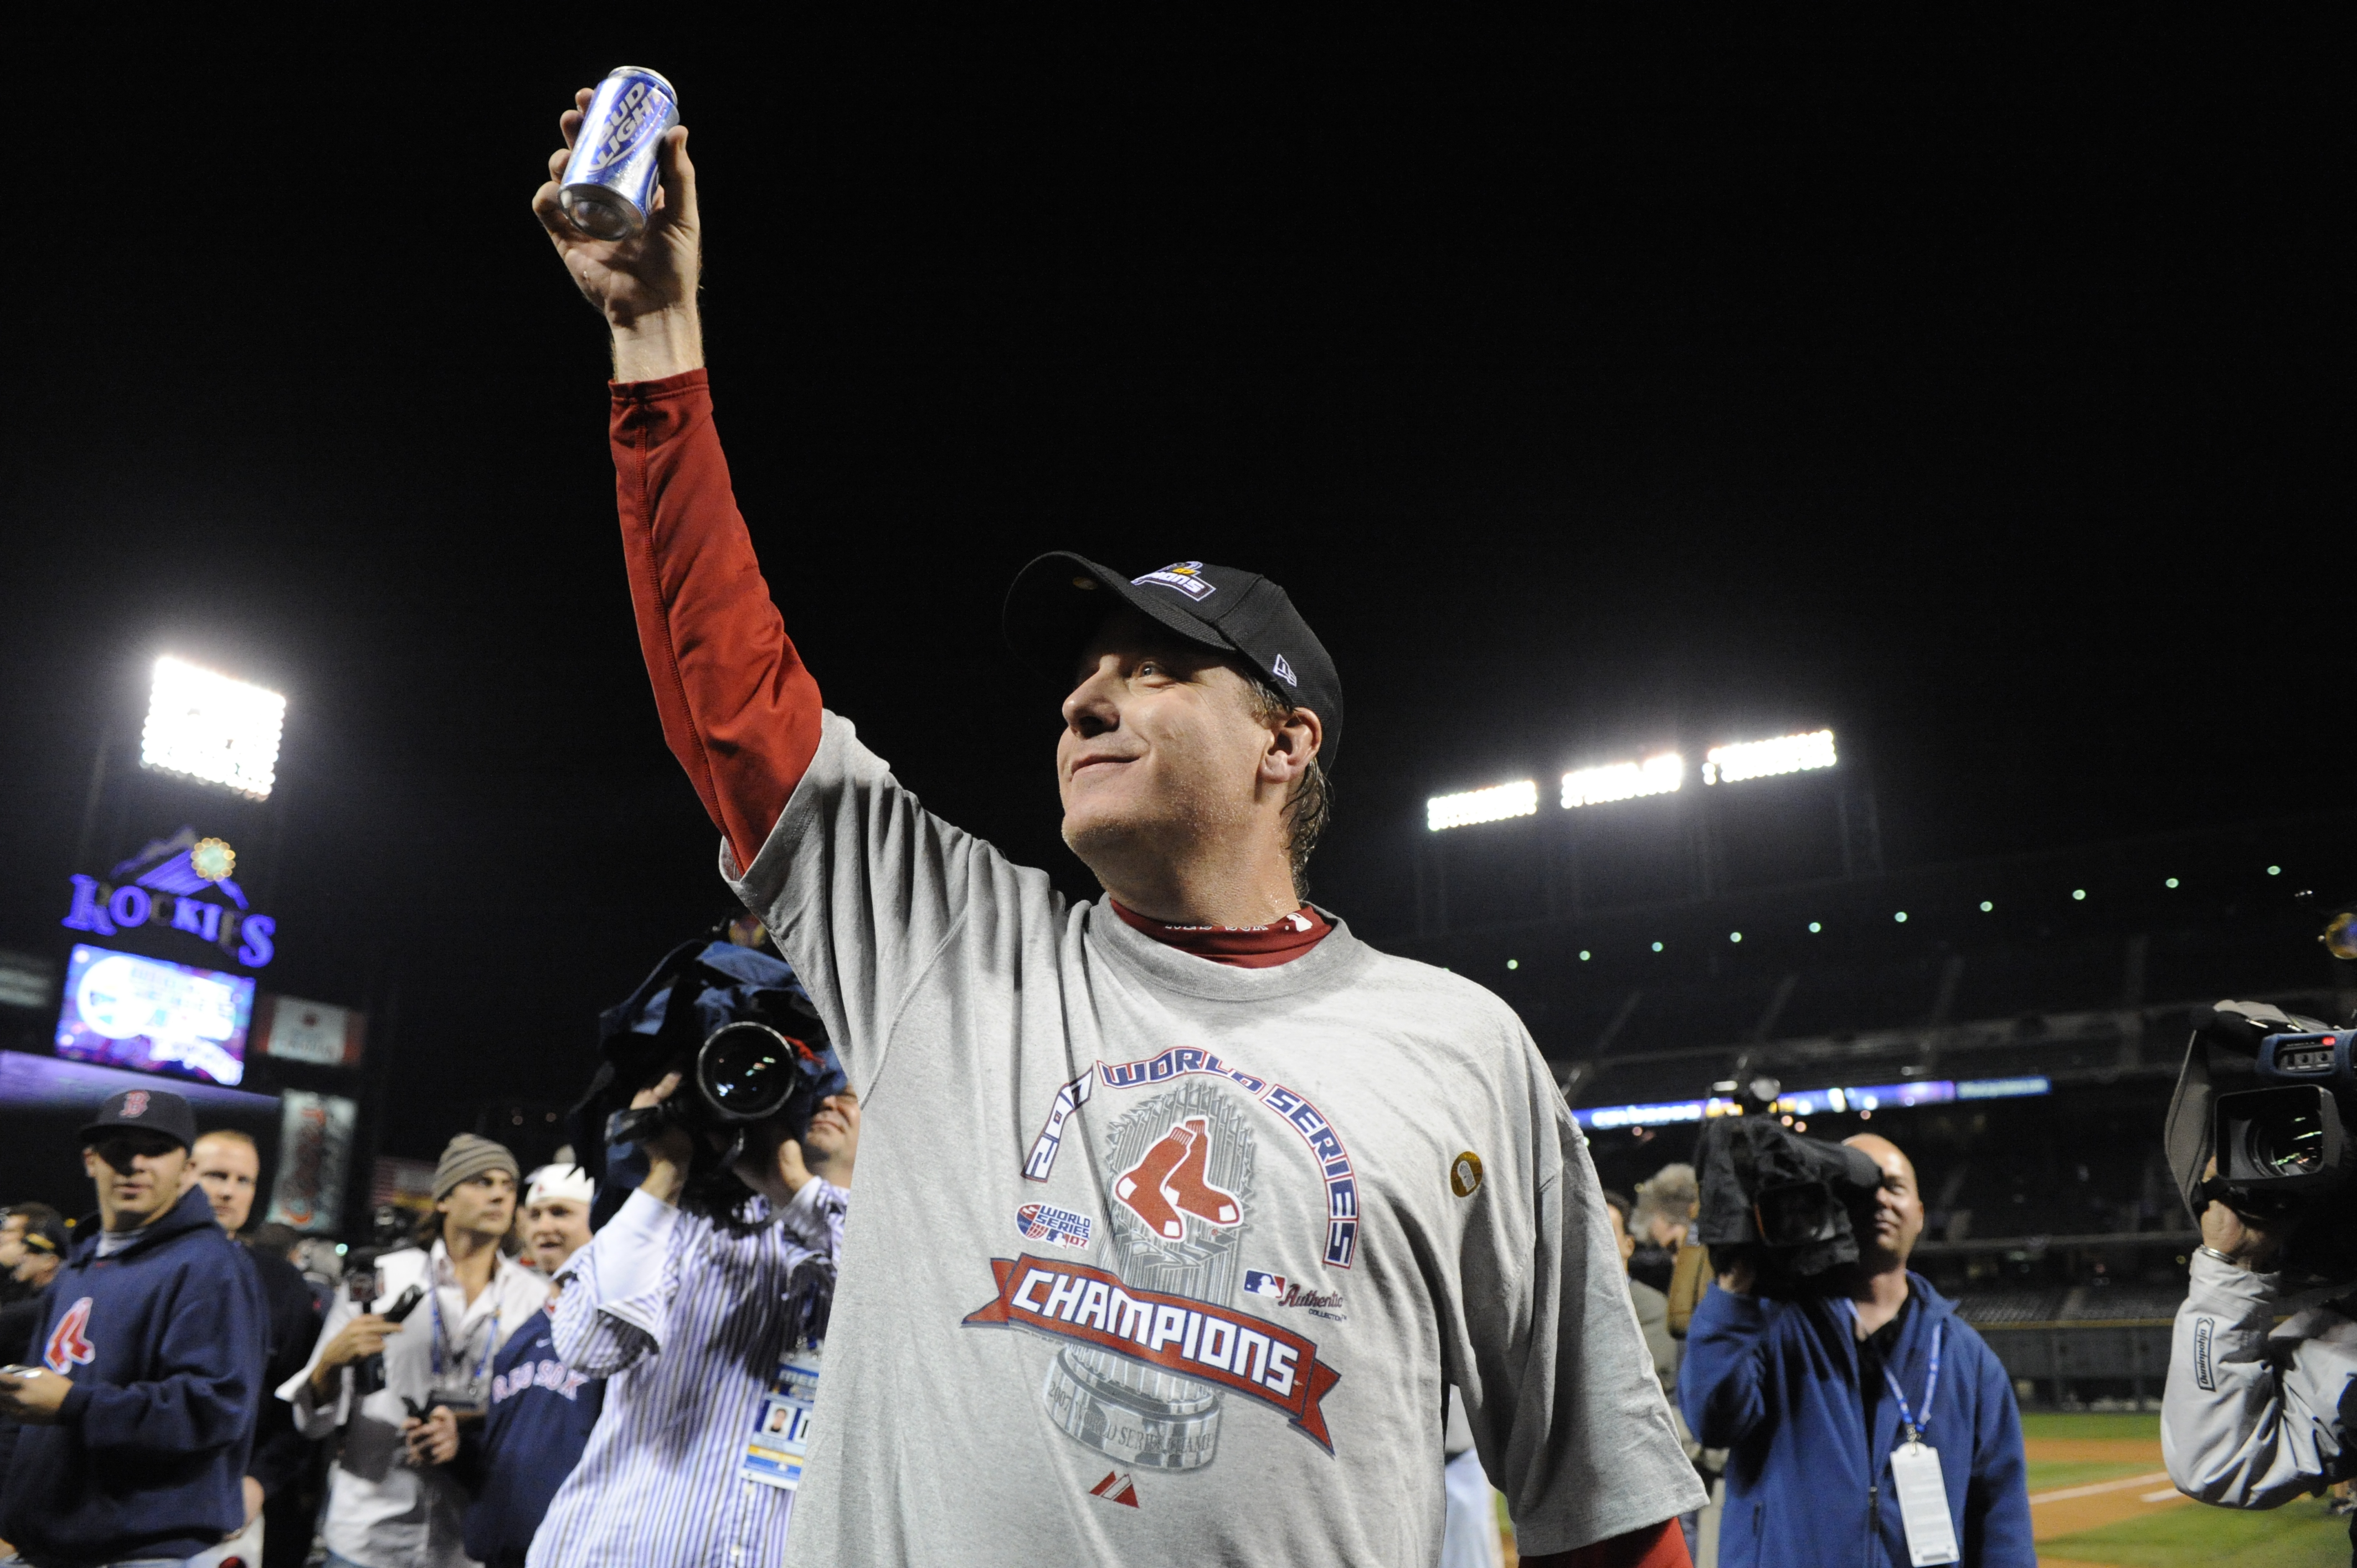 Red Sox Pitcher Curt Schilling holds a beer to the crowd, mostly Red Sox fans after the Sox won the series 4-0. (Andy Cross&mdash;Denver Post via Getty Images)